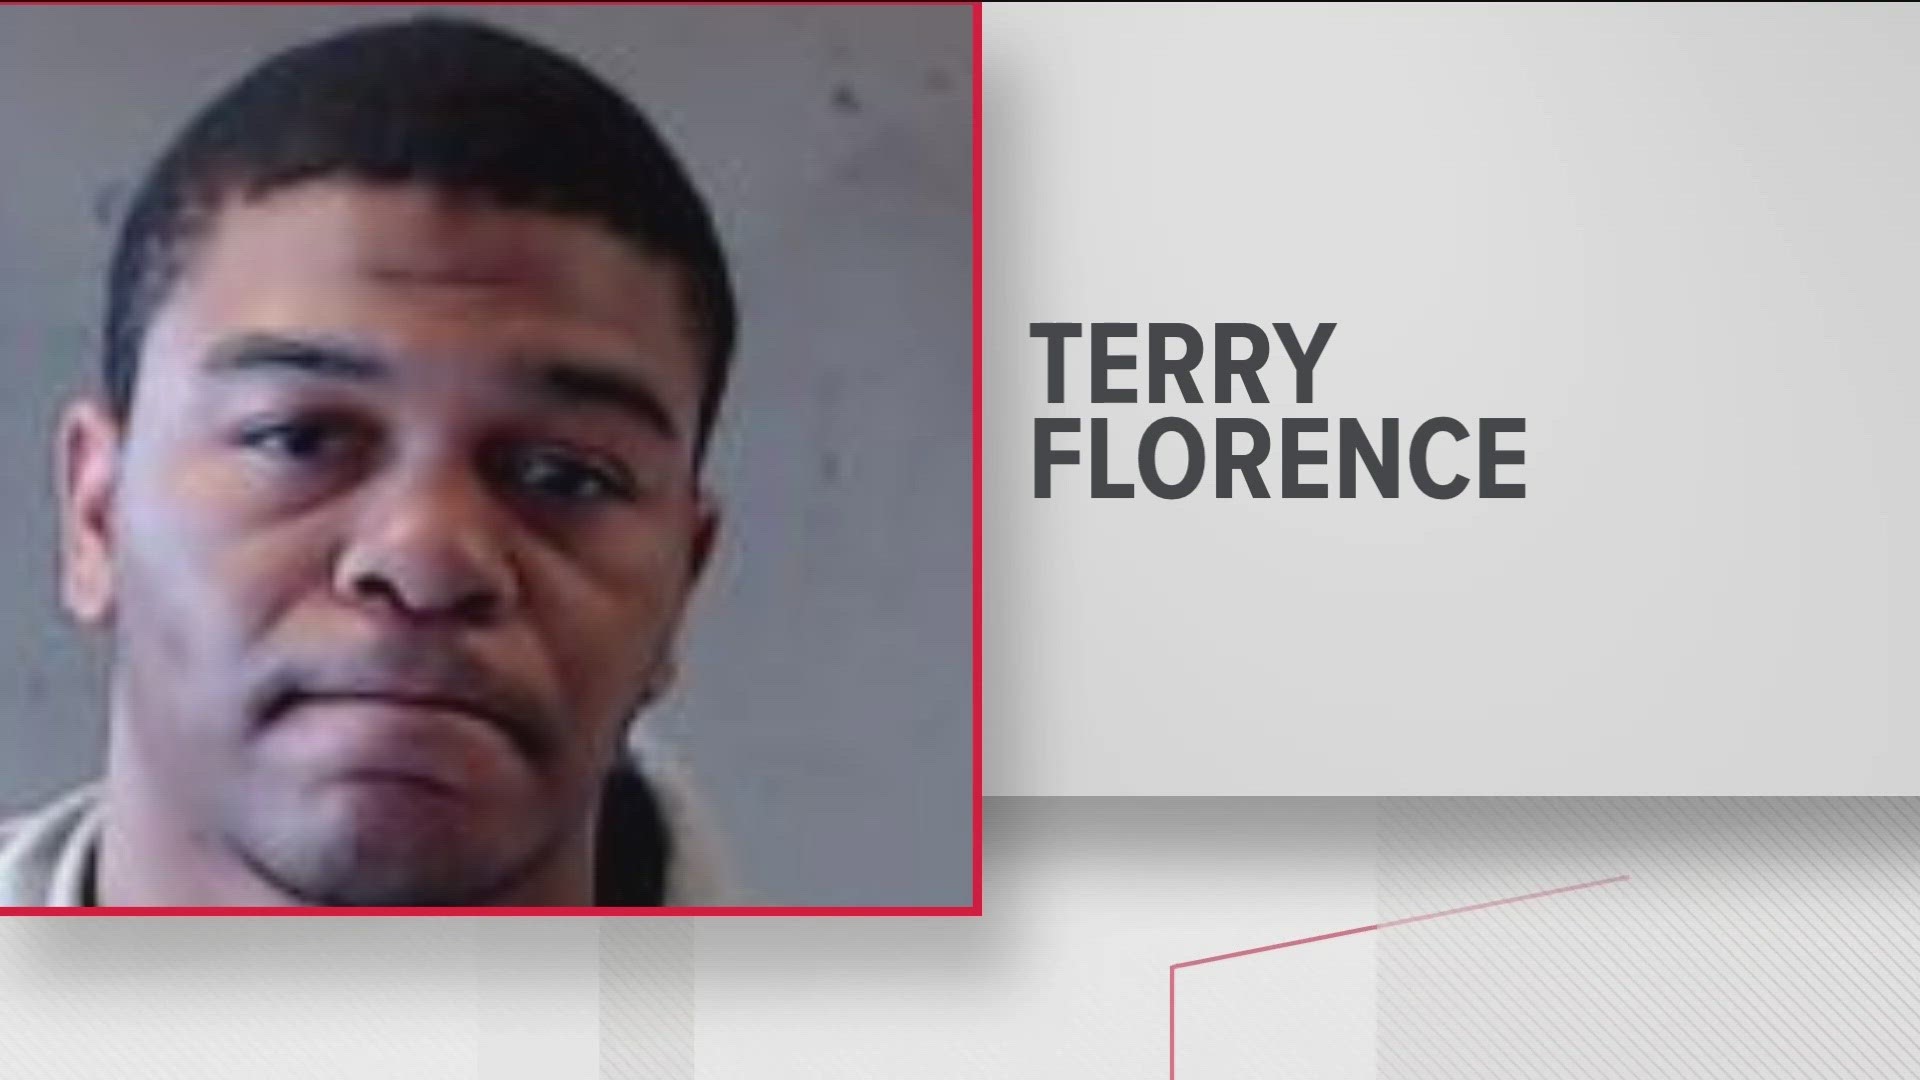 Terry Florence is one of 11 men indicted in a trafficking ring uncovered after a missing 17-year-old Missouri girl was rescued in a US Marshals operation in Atlanta.